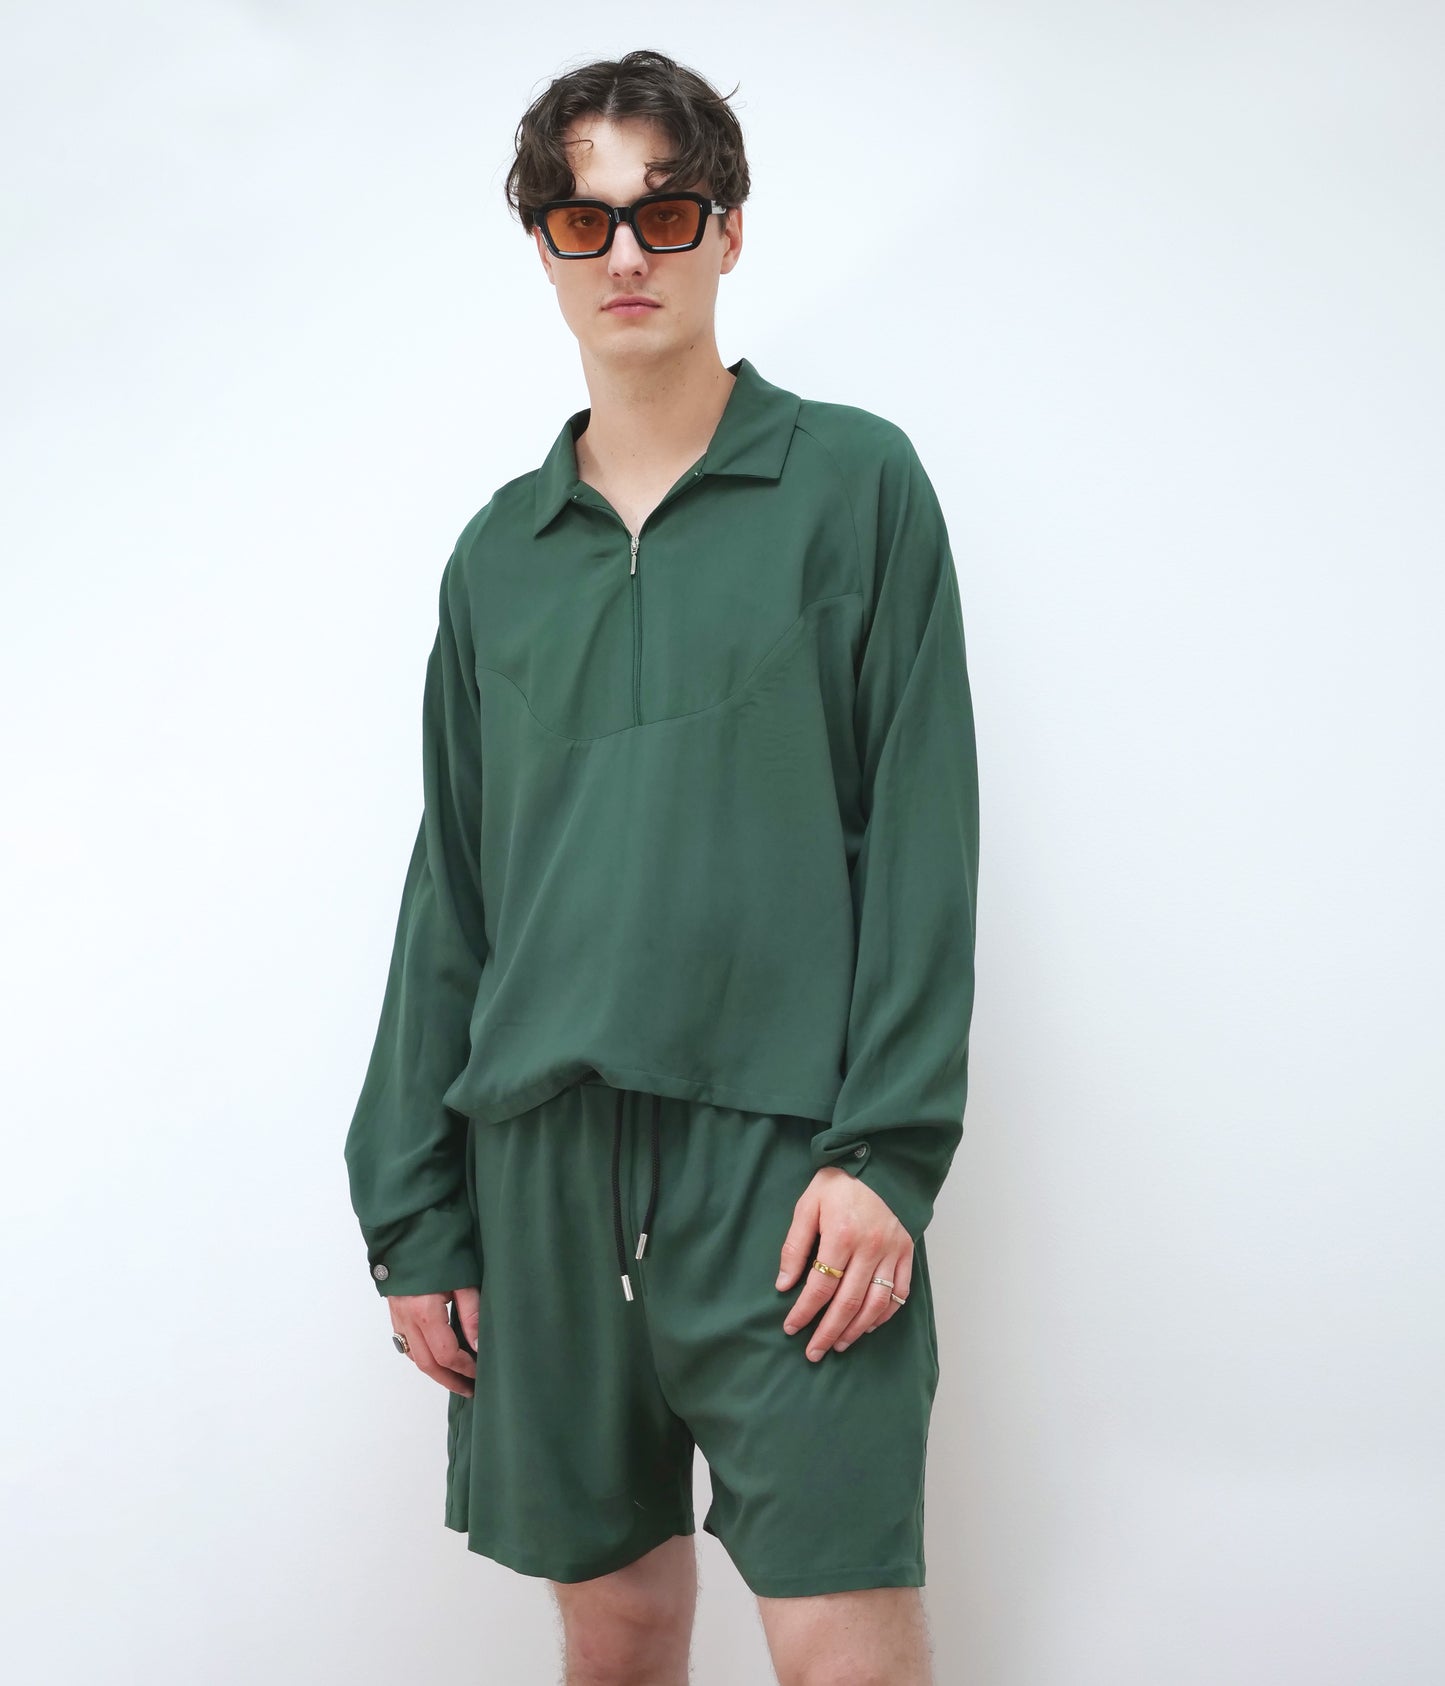 Unisex co-ord // forest green